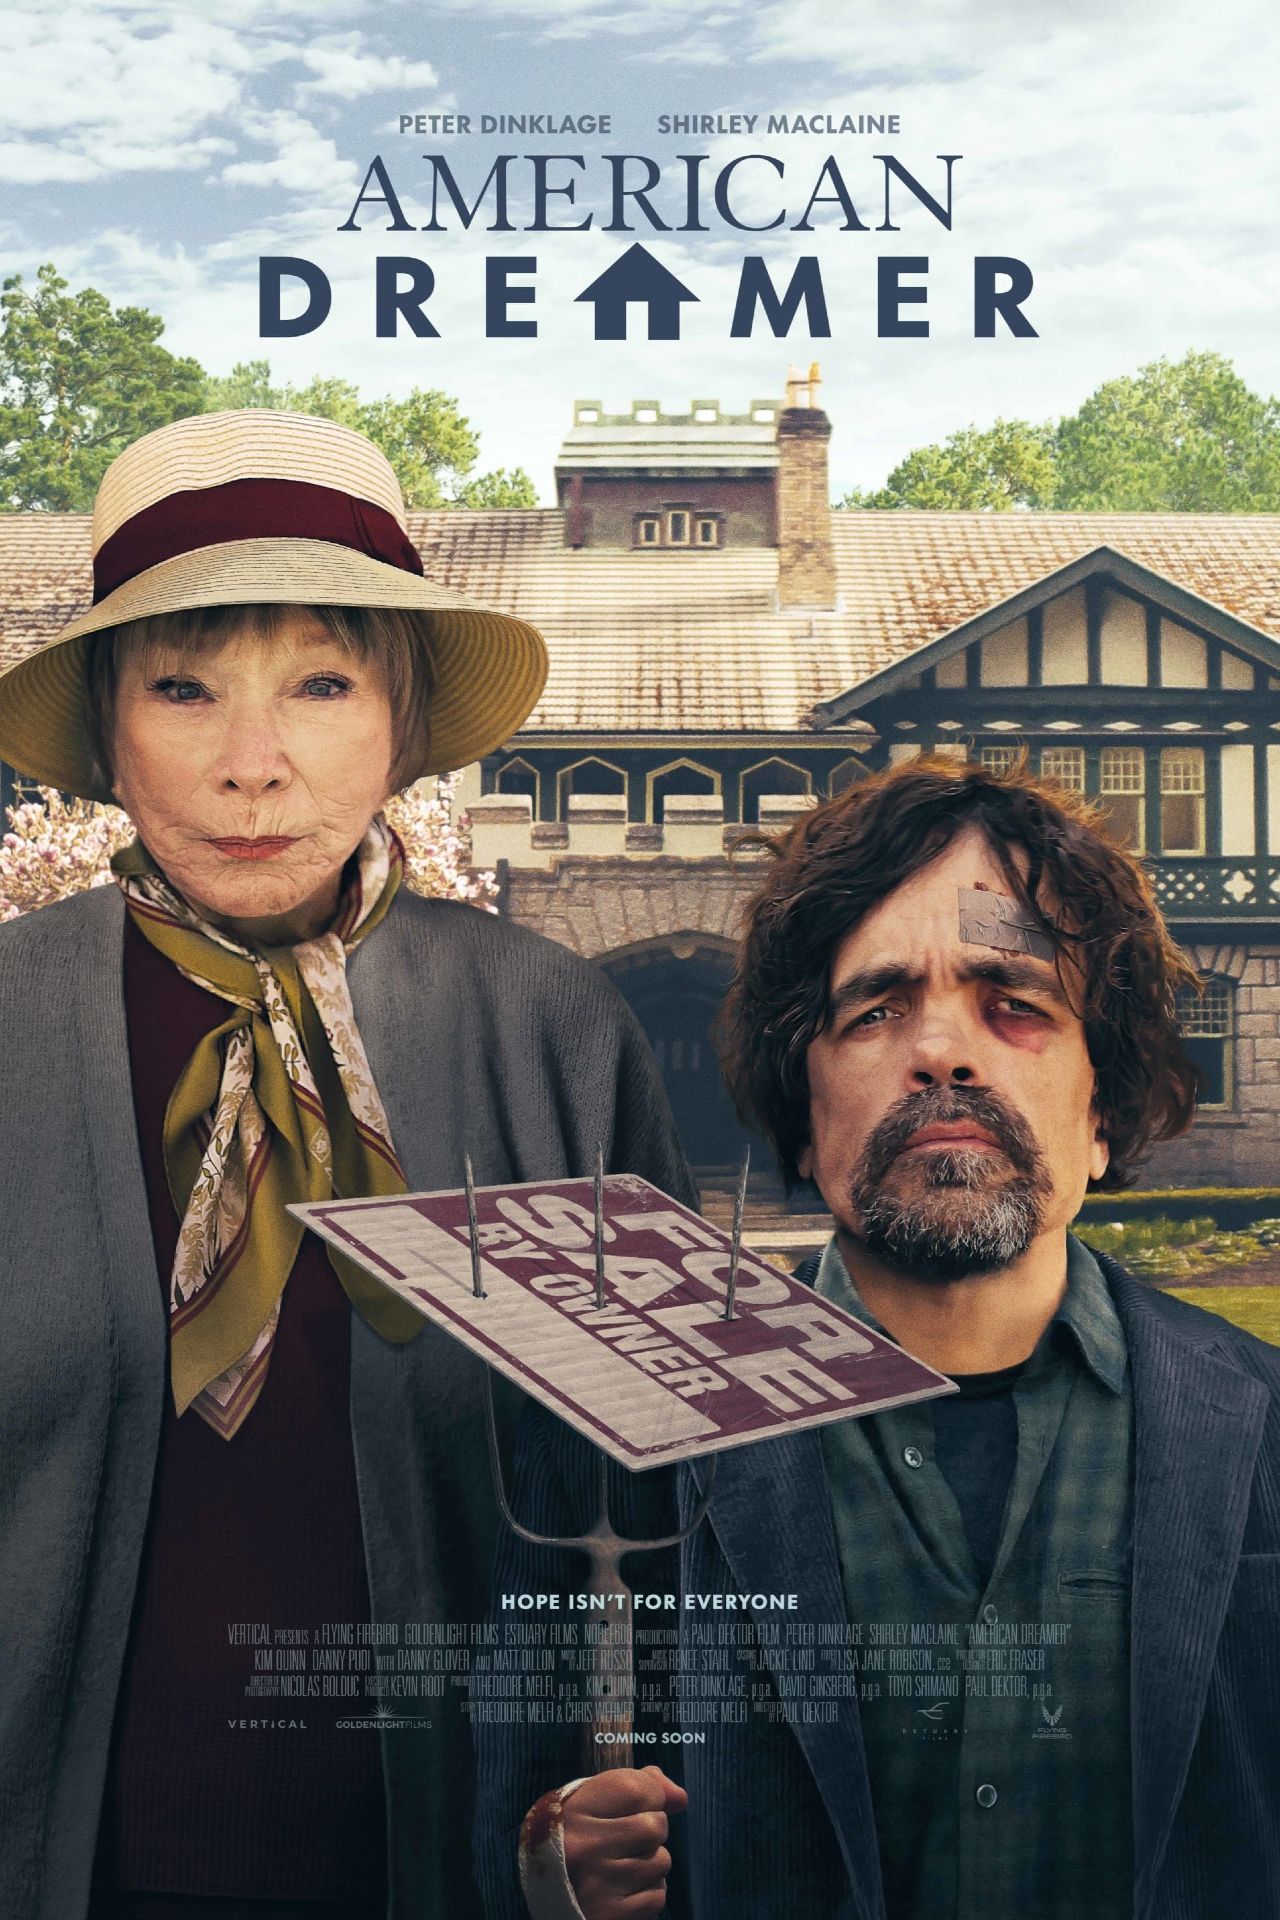 American Dreamer Review: Peter Dinklage’s Dark Comedy Has Great Emotional Highs & Hilarious Lows